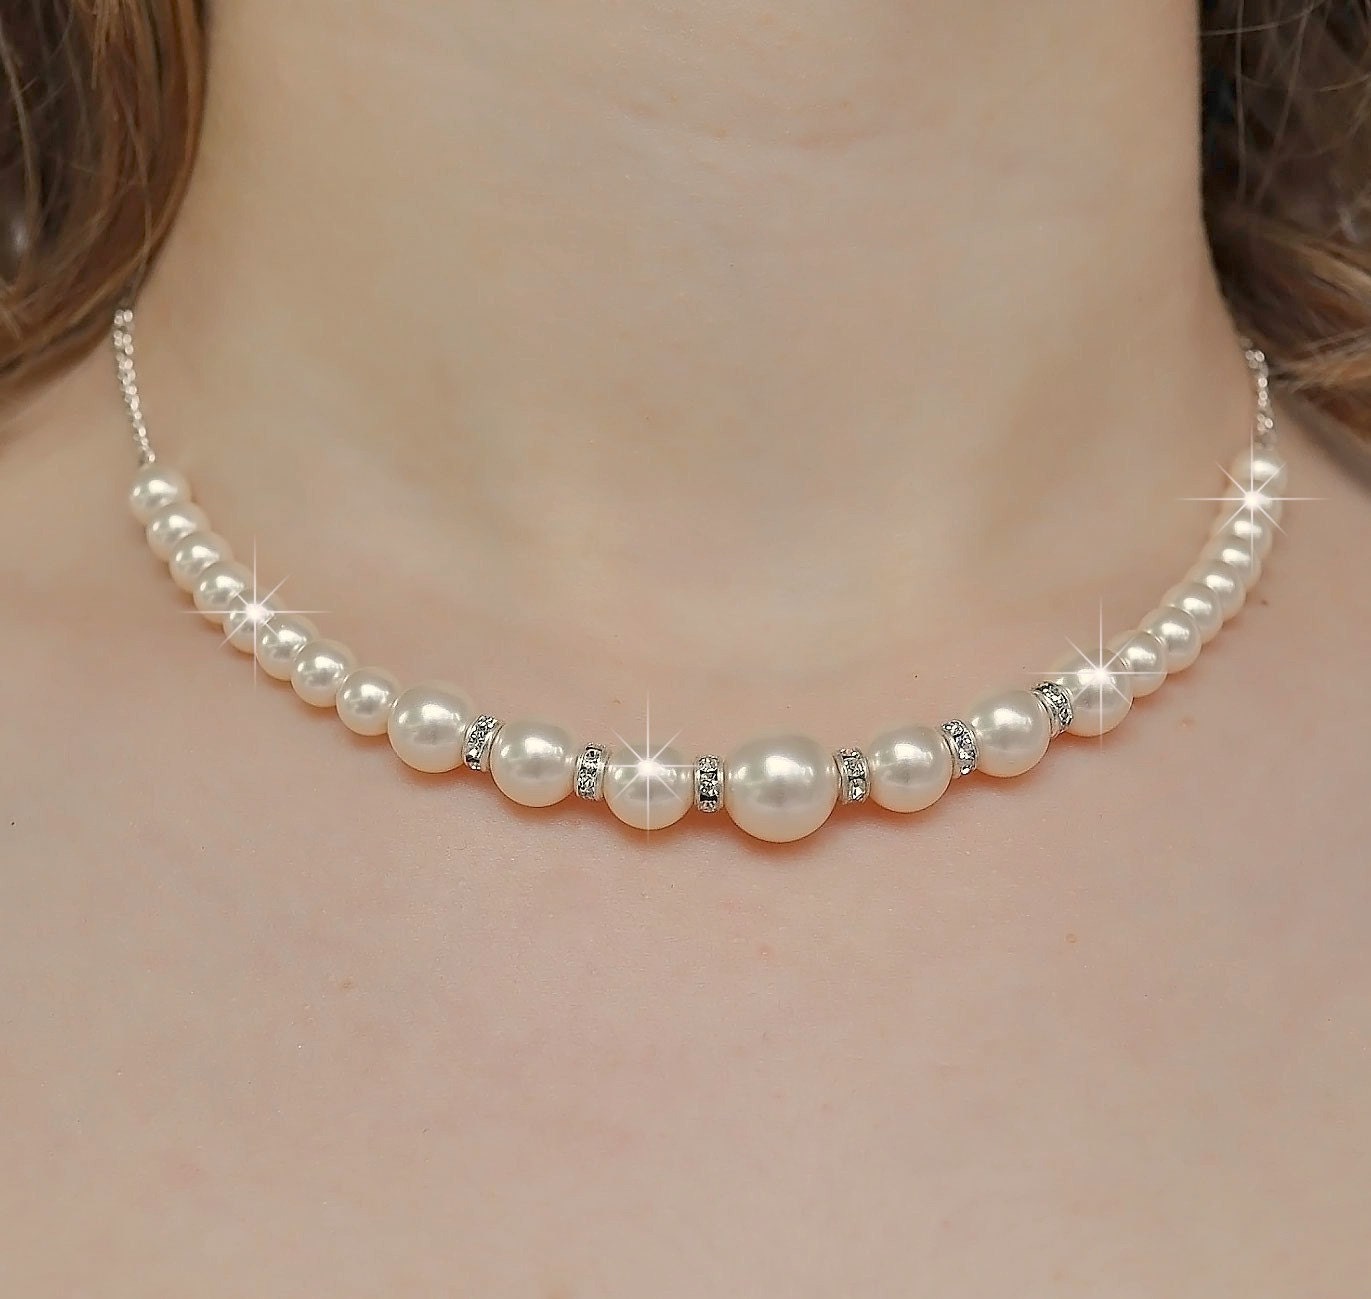 Bridal Necklace Rhinestone Pearl Necklace Ivory Pearl